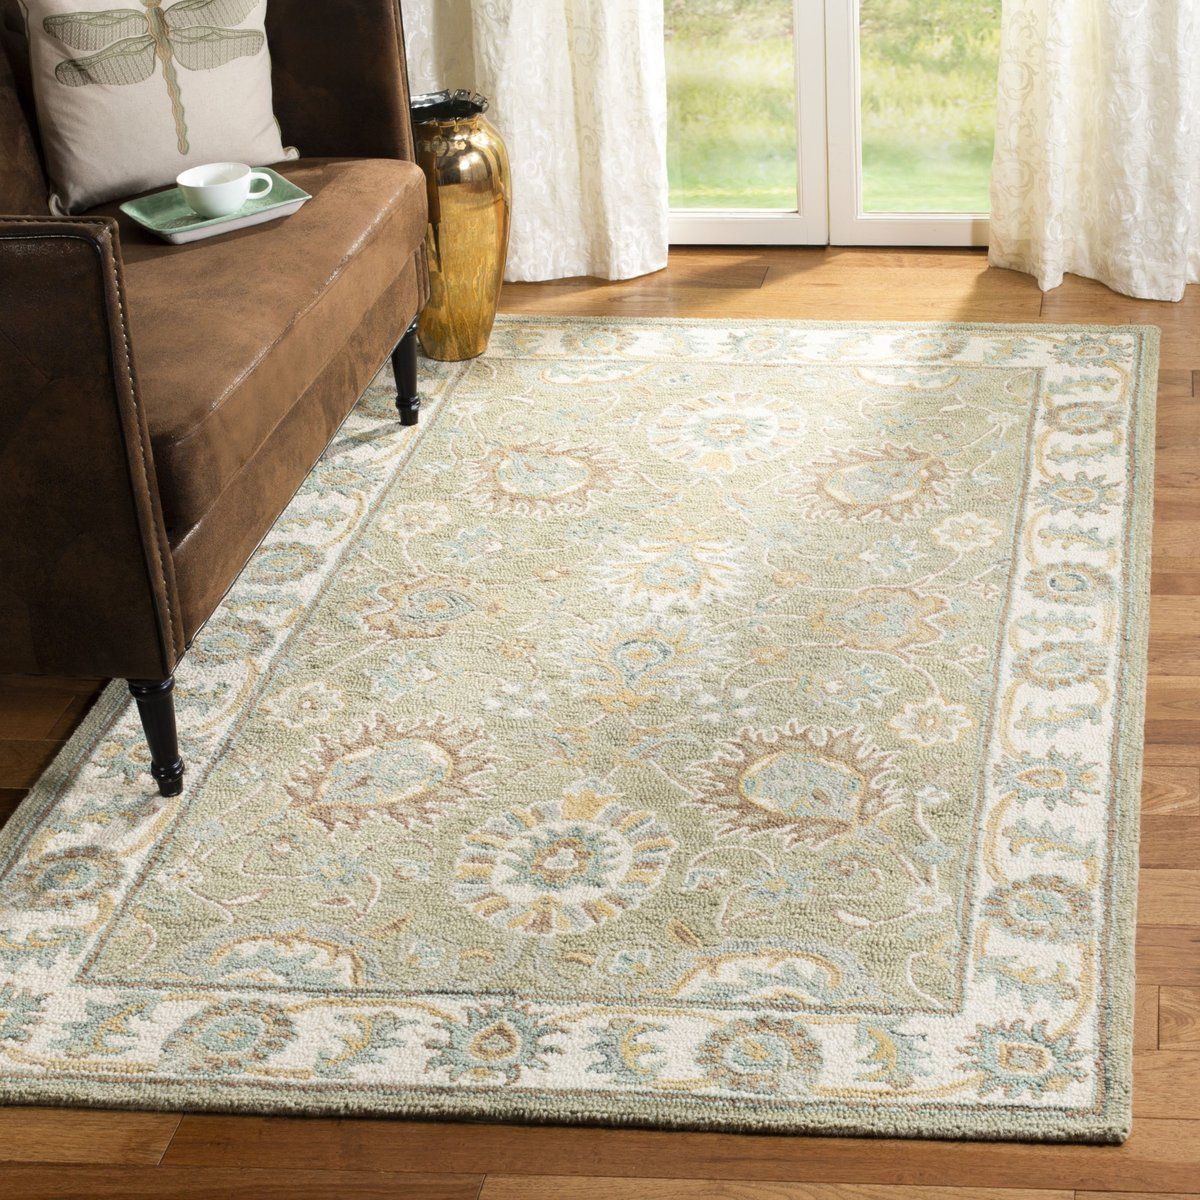 Safavieh Blossom Blm 702 Rugs | Rugs Direct Within Ivory Blossom Rugs (View 10 of 15)